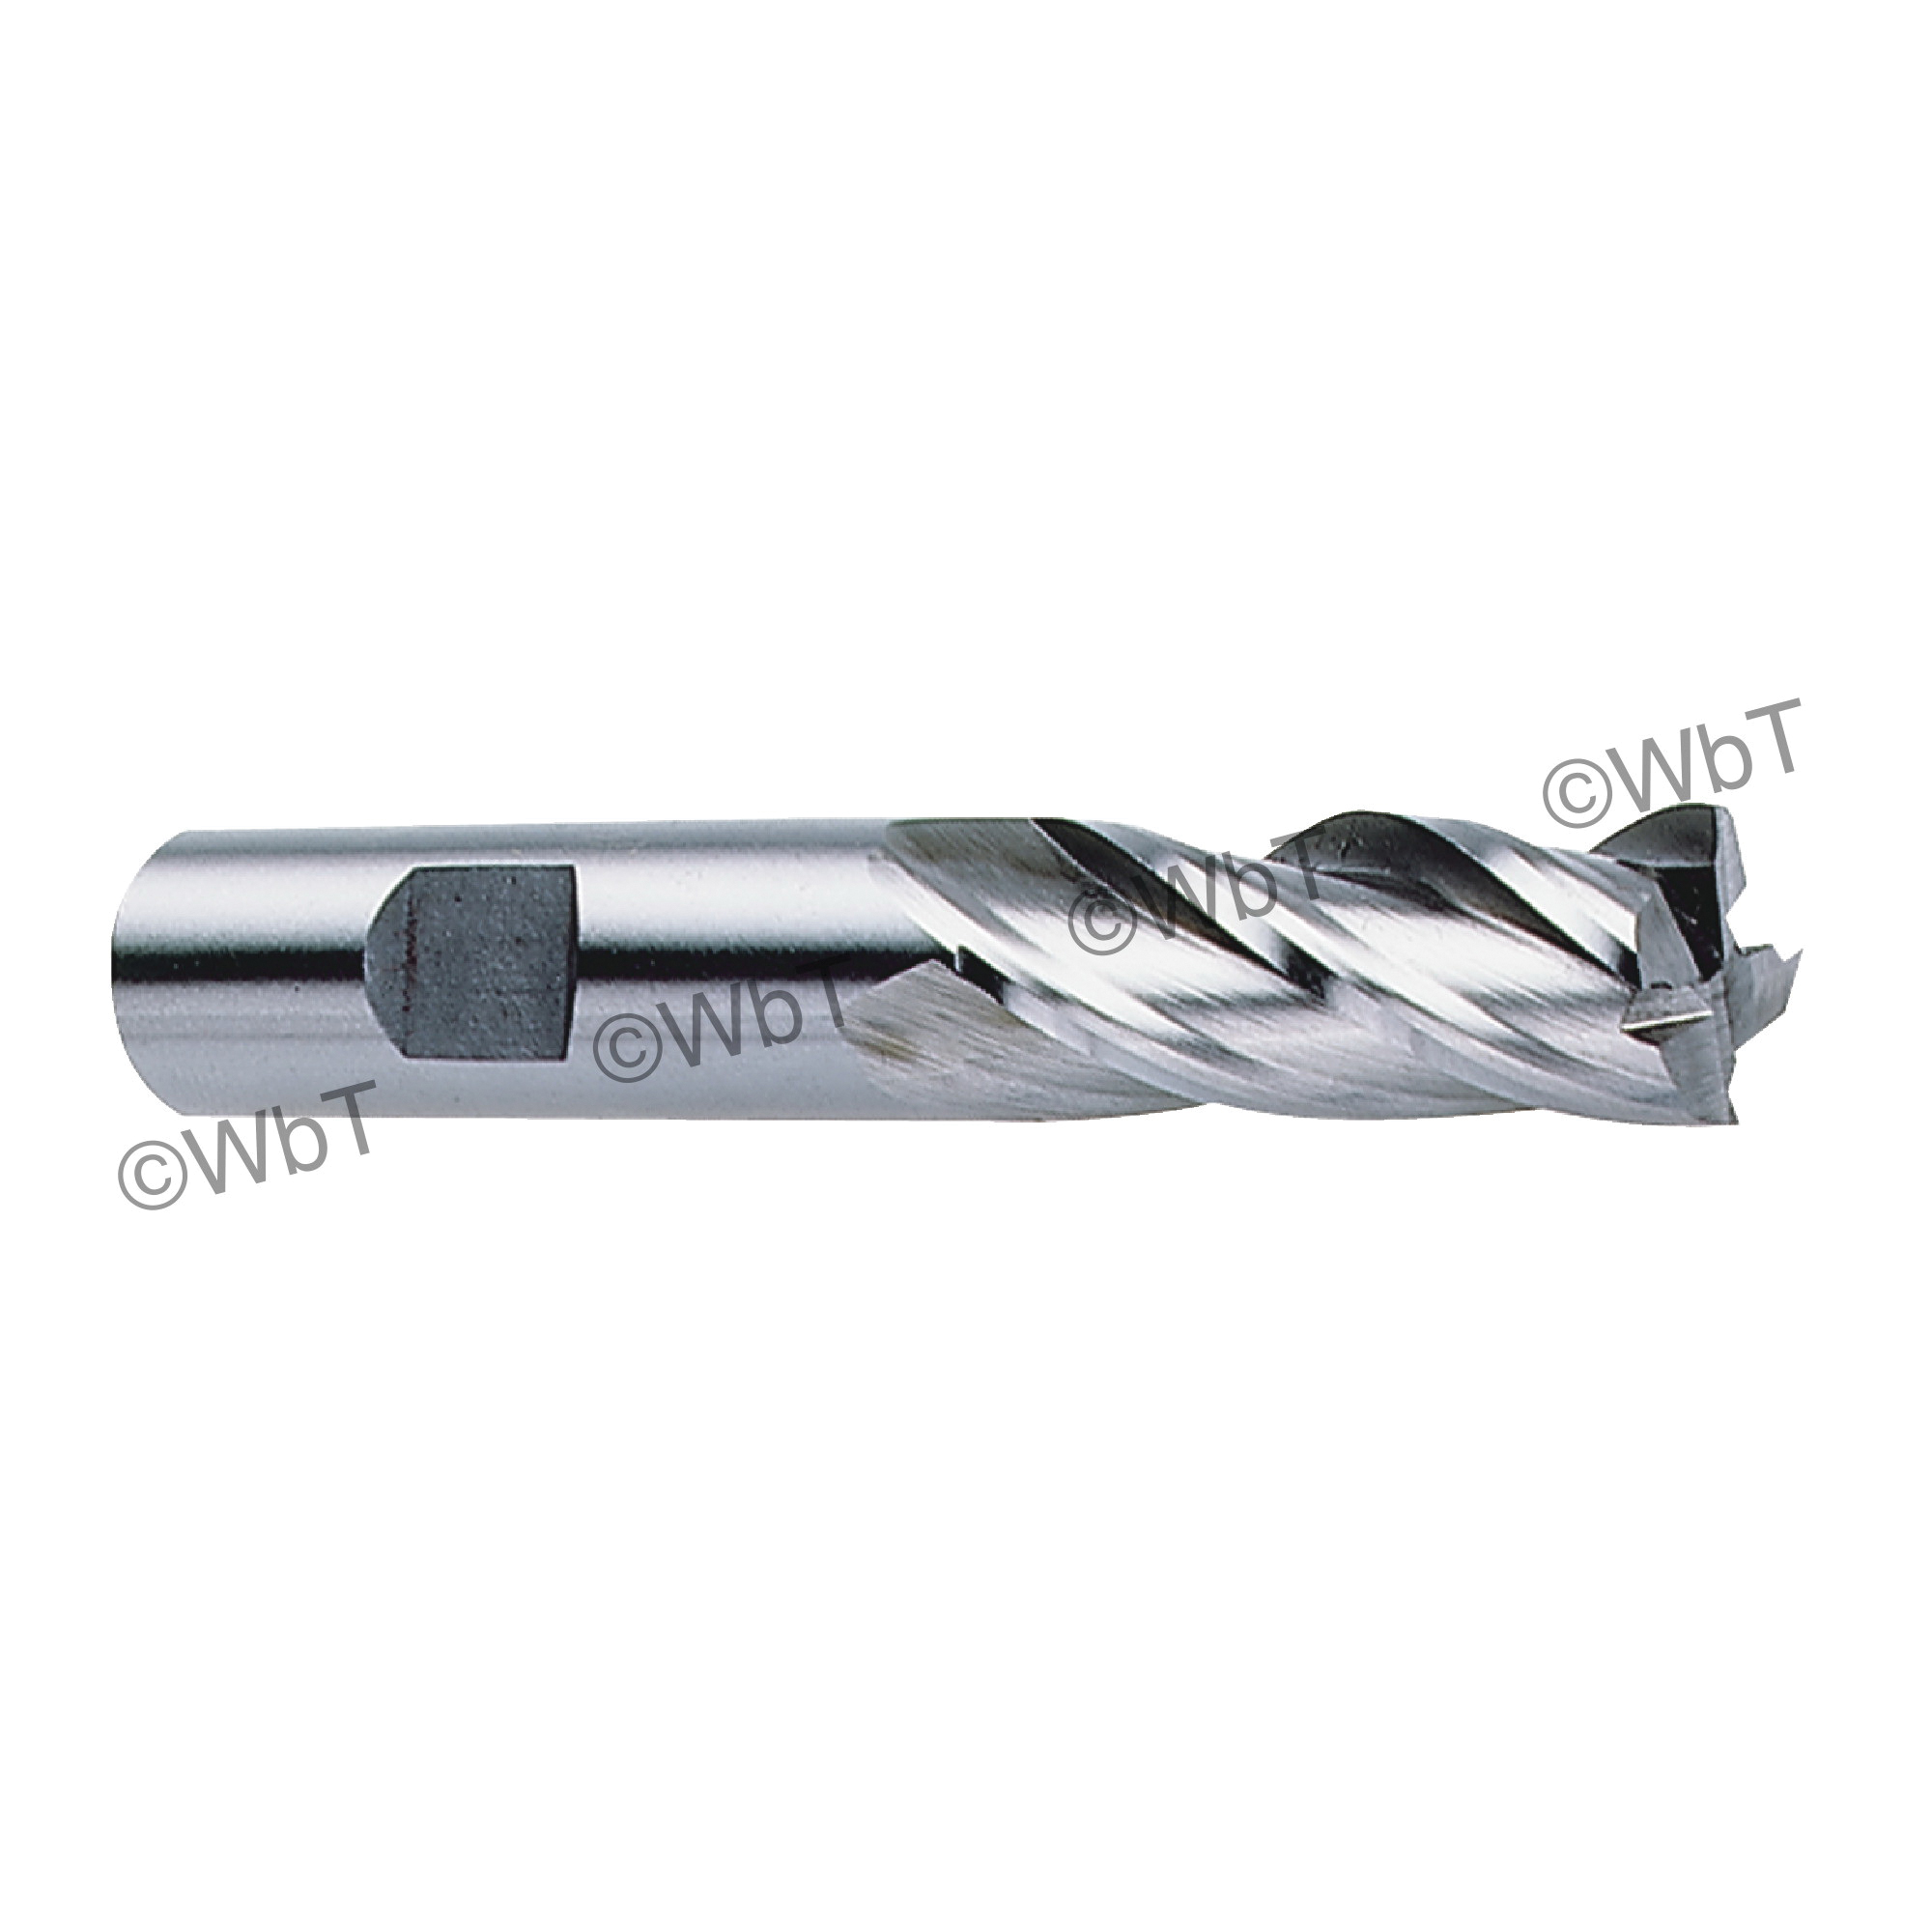 TTC 08-005-750 D2 General Purpose Non-Center Cutting Single Square End Mill, 2 in Dia Cutter, 2 in Length of Cut, 6 Flutes, 3/4 in Dia Shank, 4-1/2 in OAL, Bright